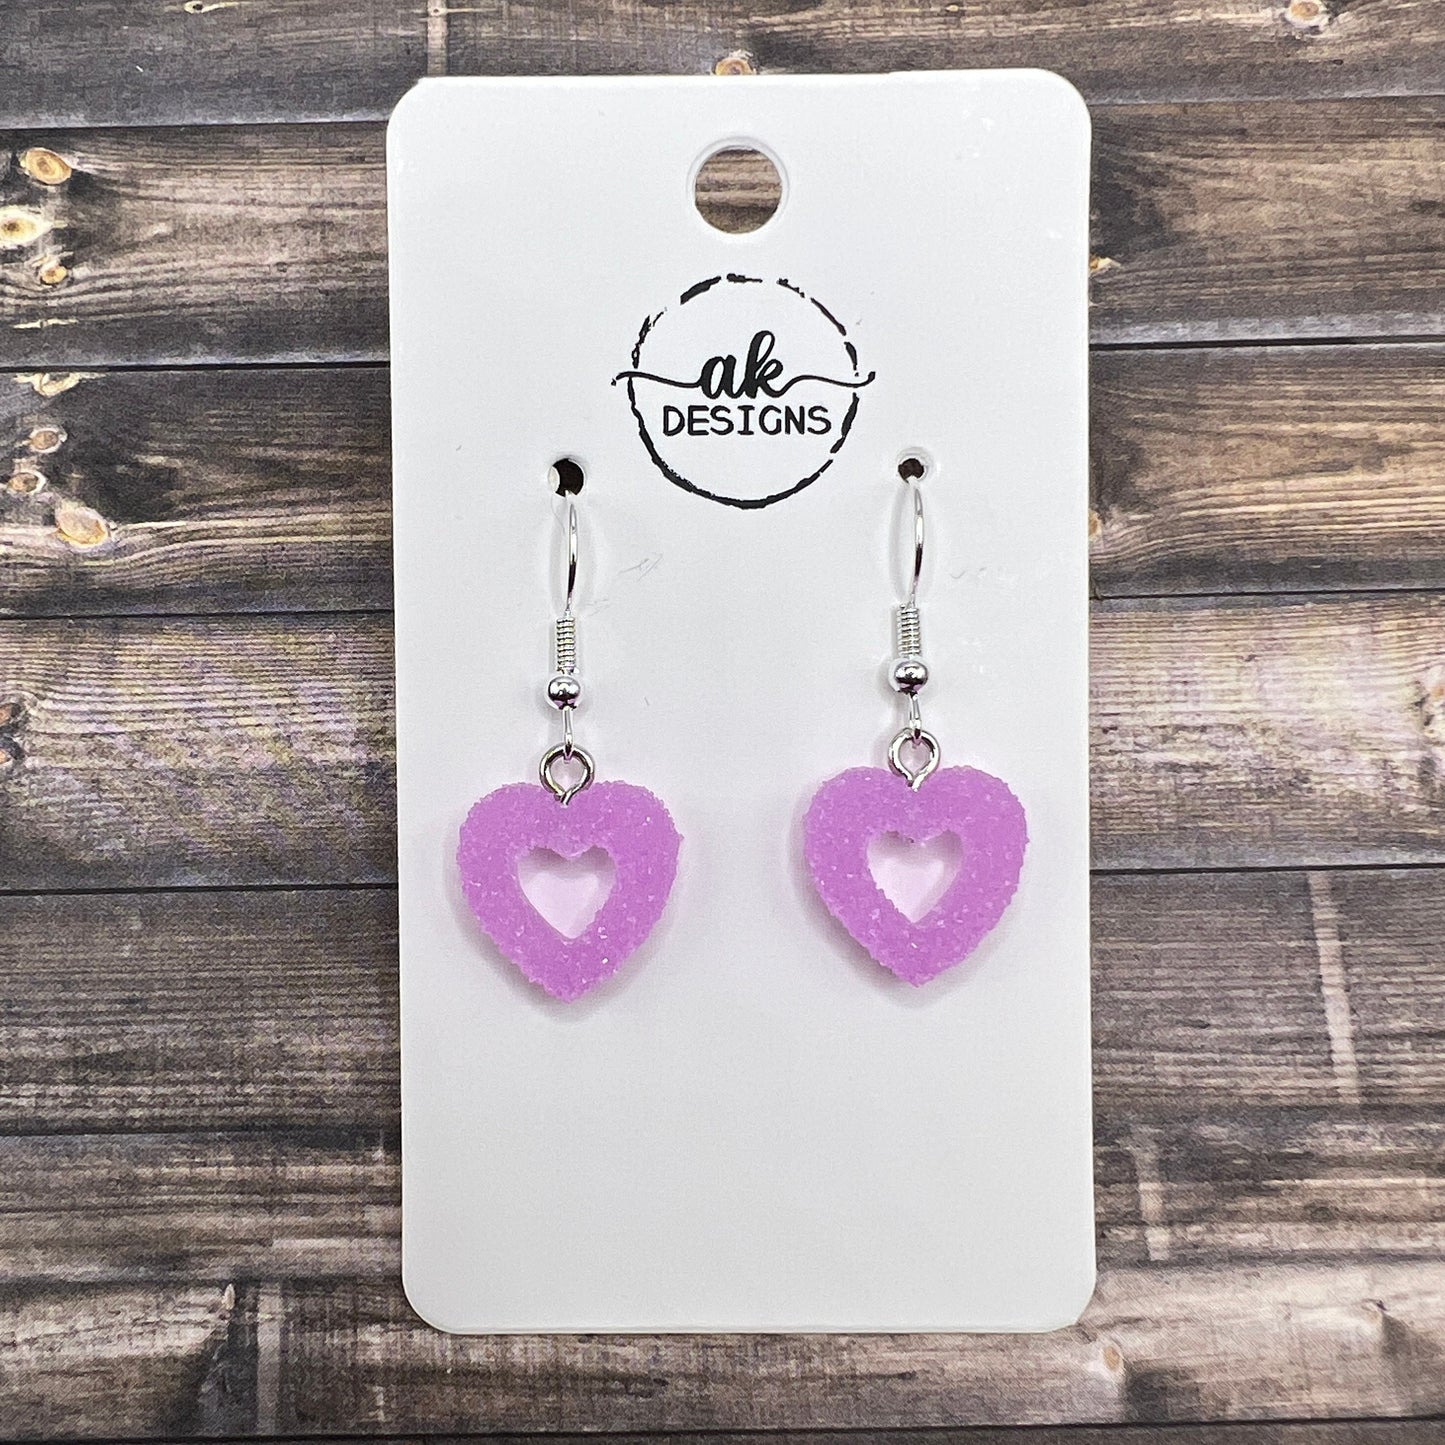 Sugar Sweet Coated Candy Hearts Darling Hypoallergenic Valentine's Day Love Earrings